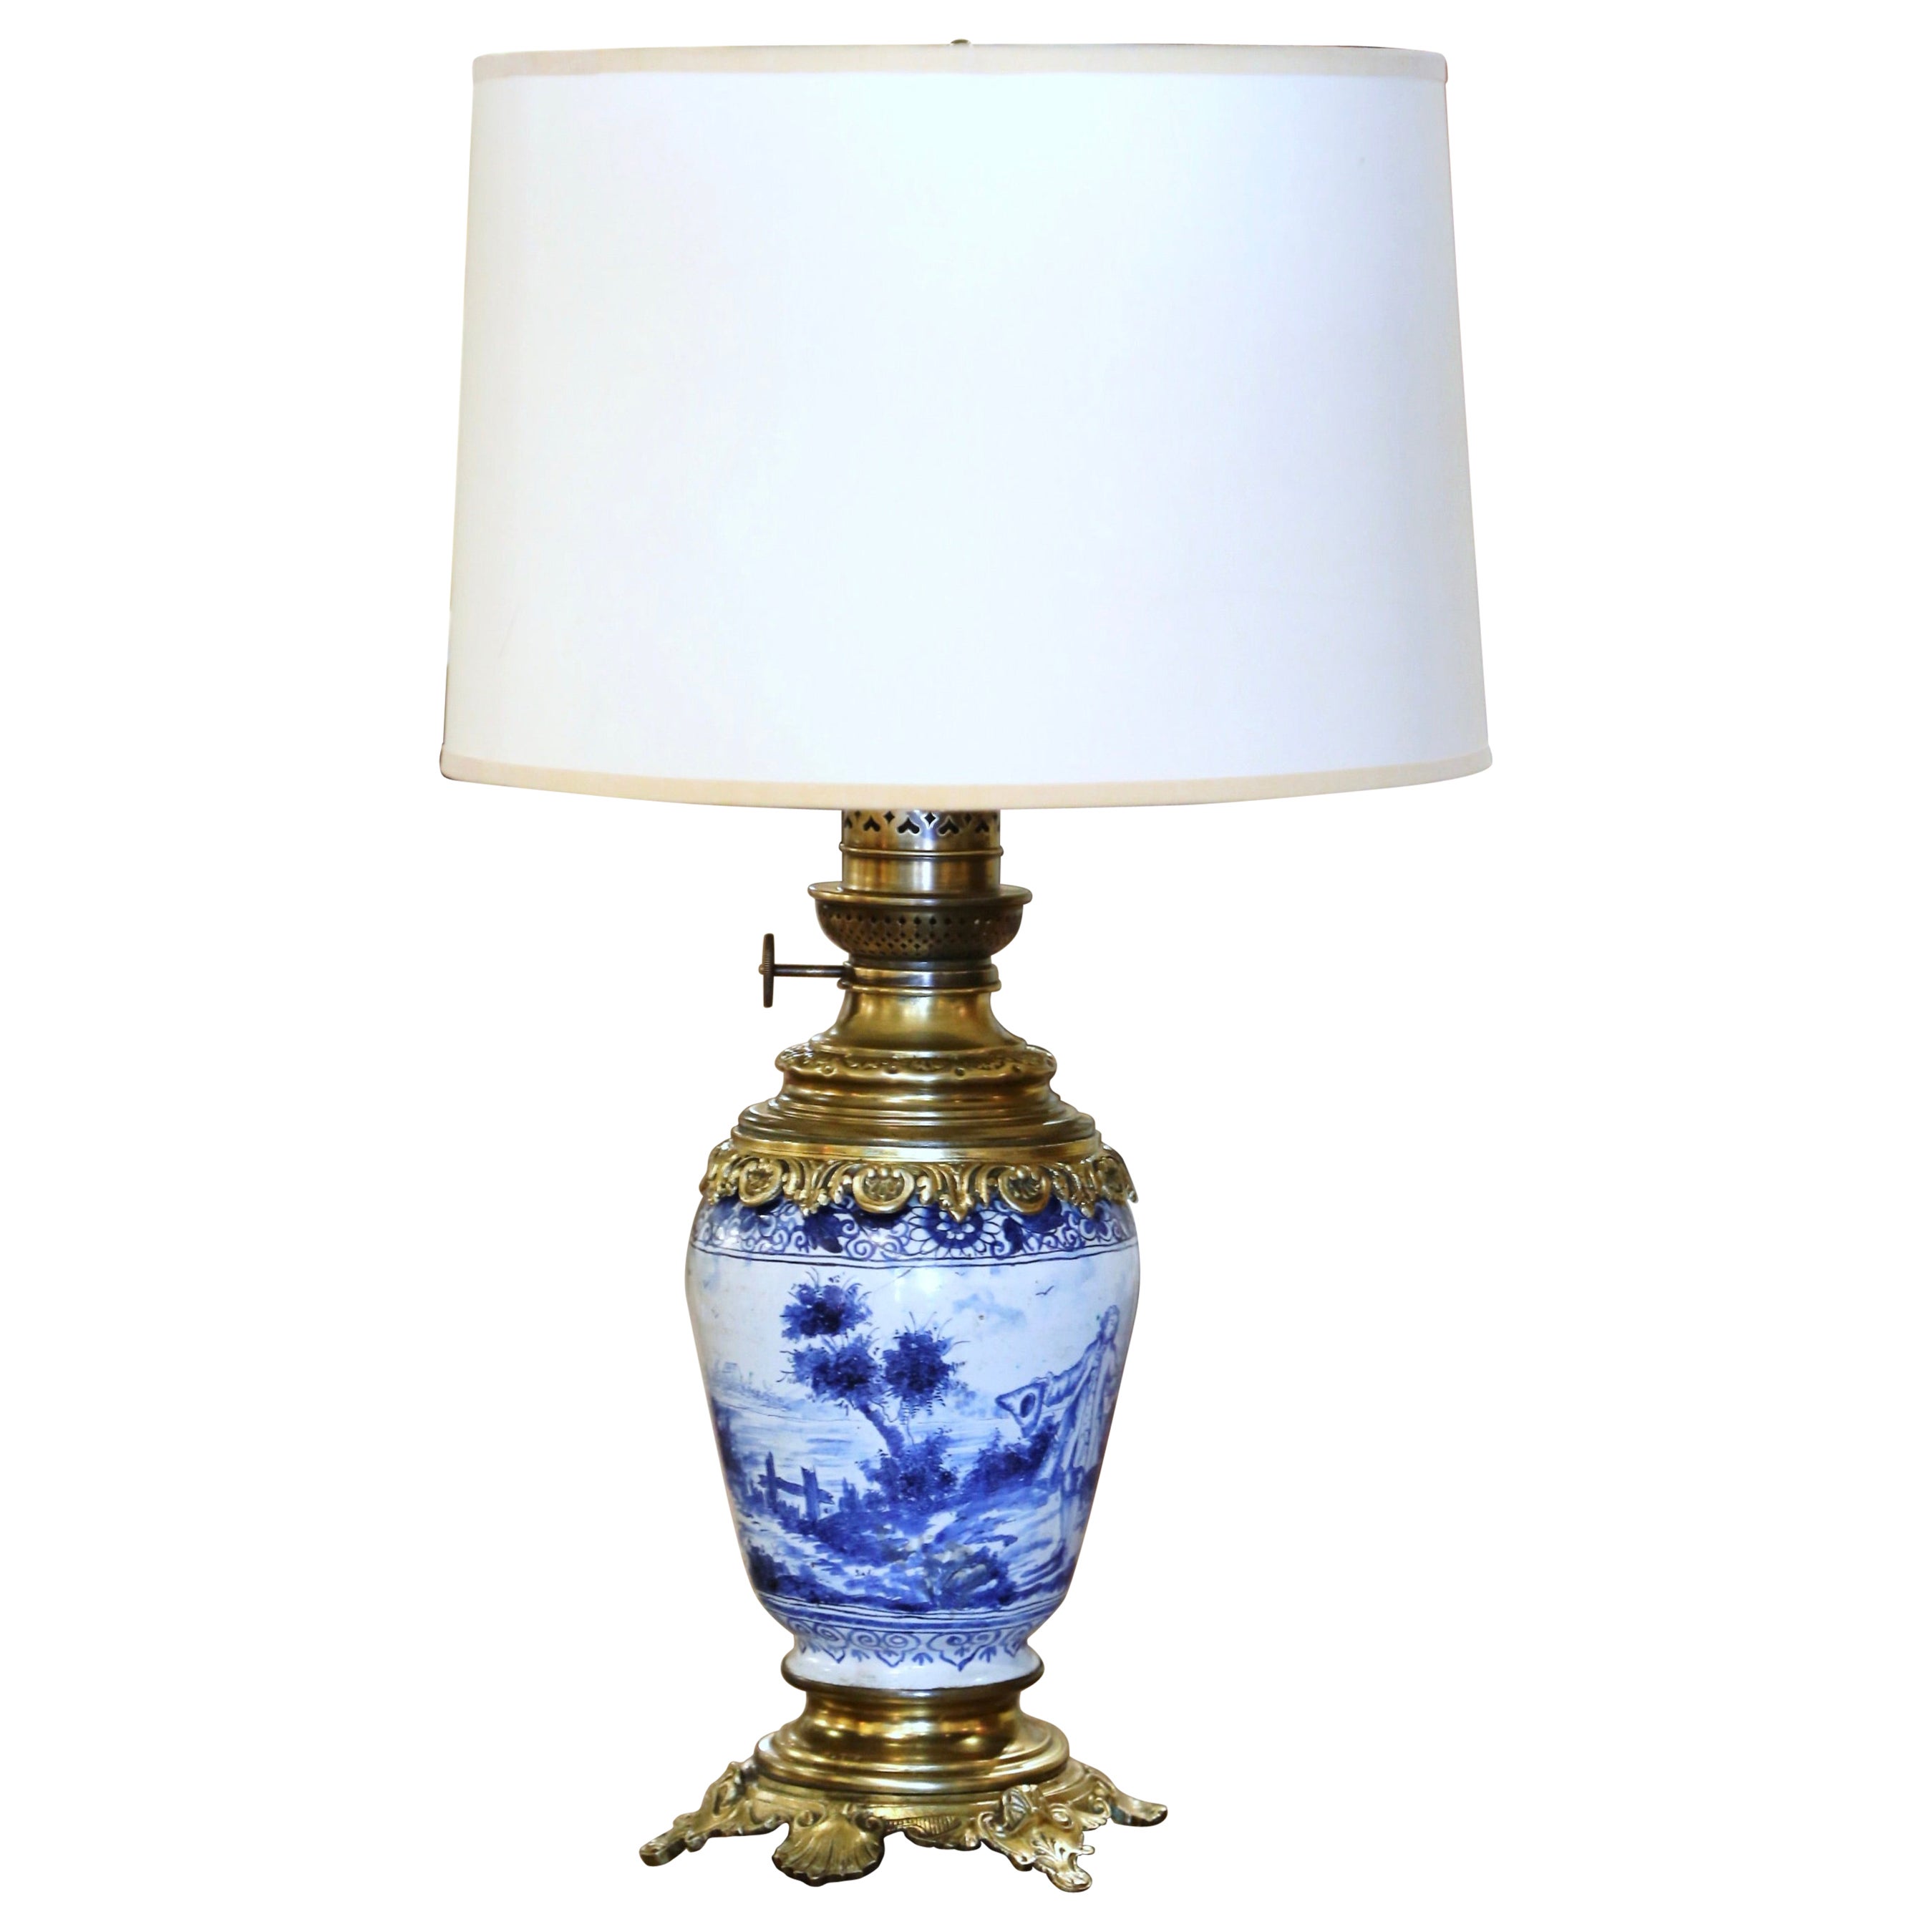 19th Century French Delft Blue and White Painted Porcelain and Brass Oil Lamp For Sale